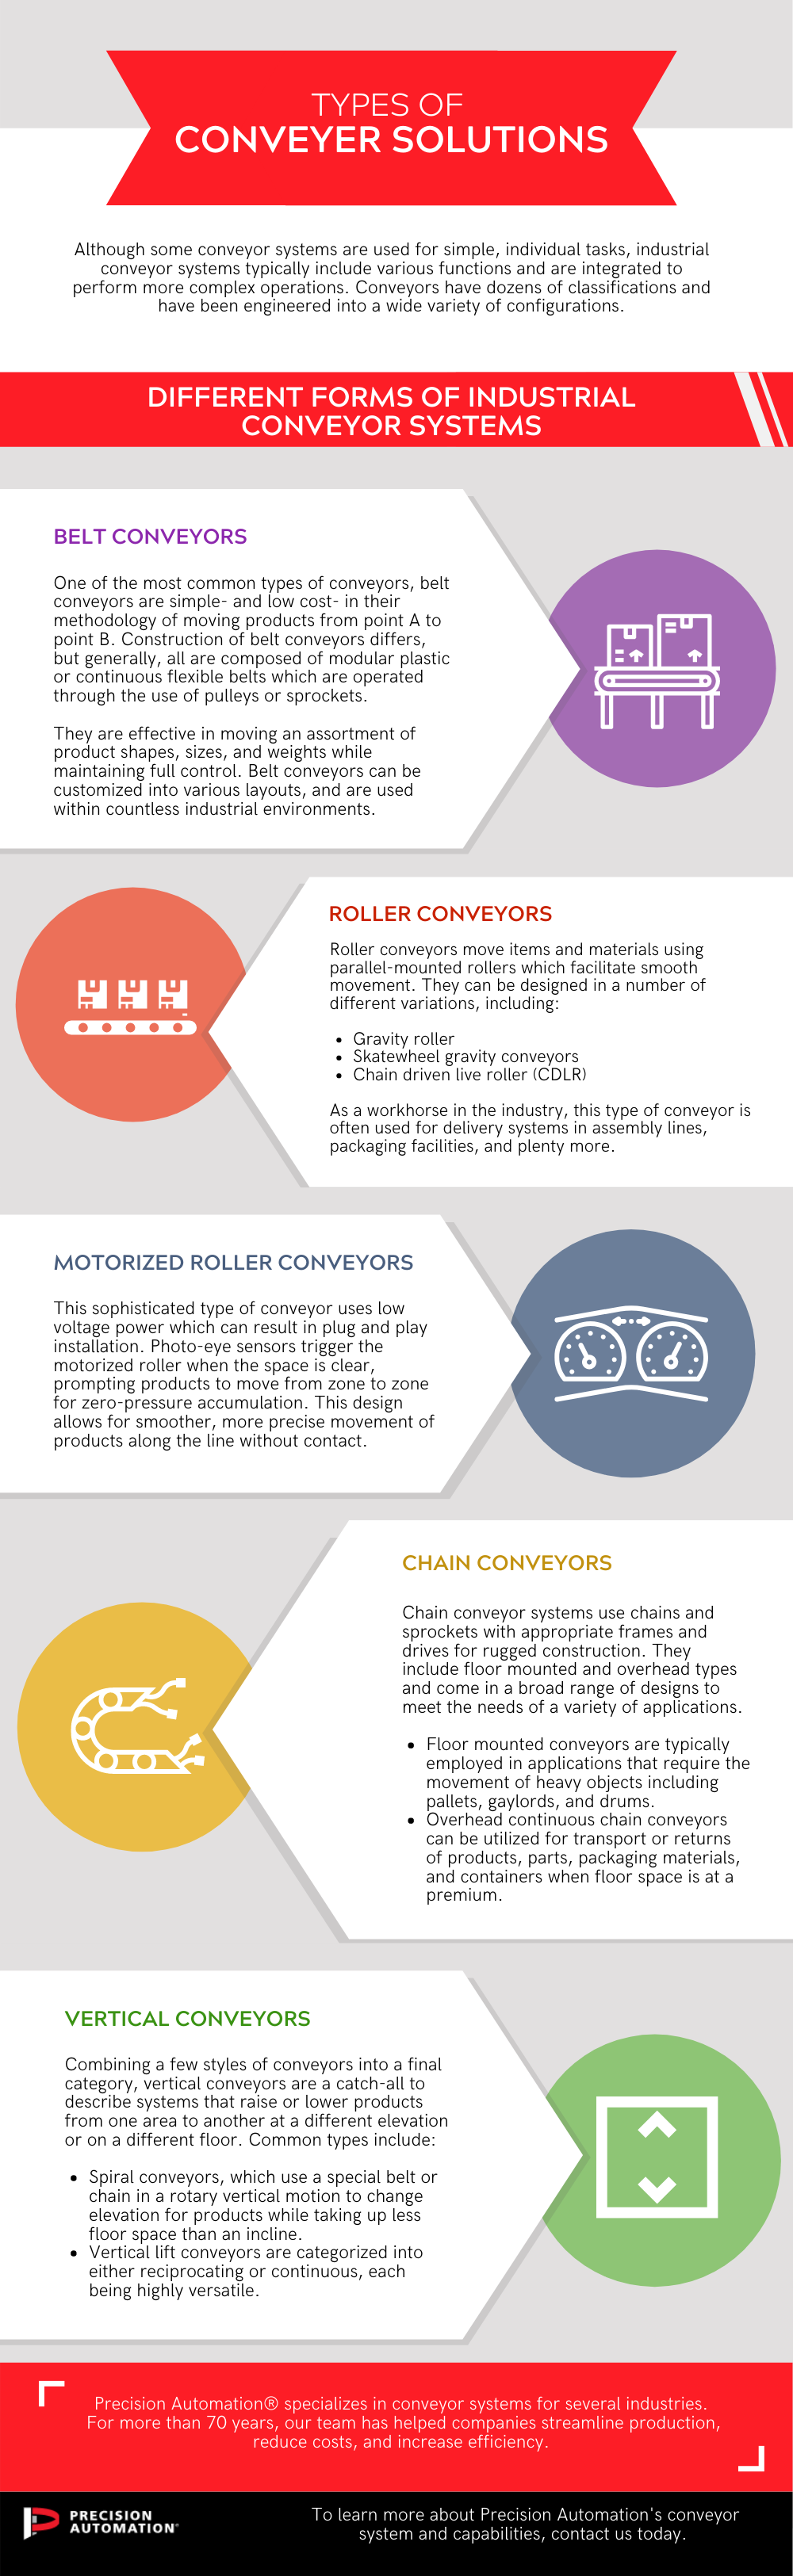 Types of Conveyor Solutions